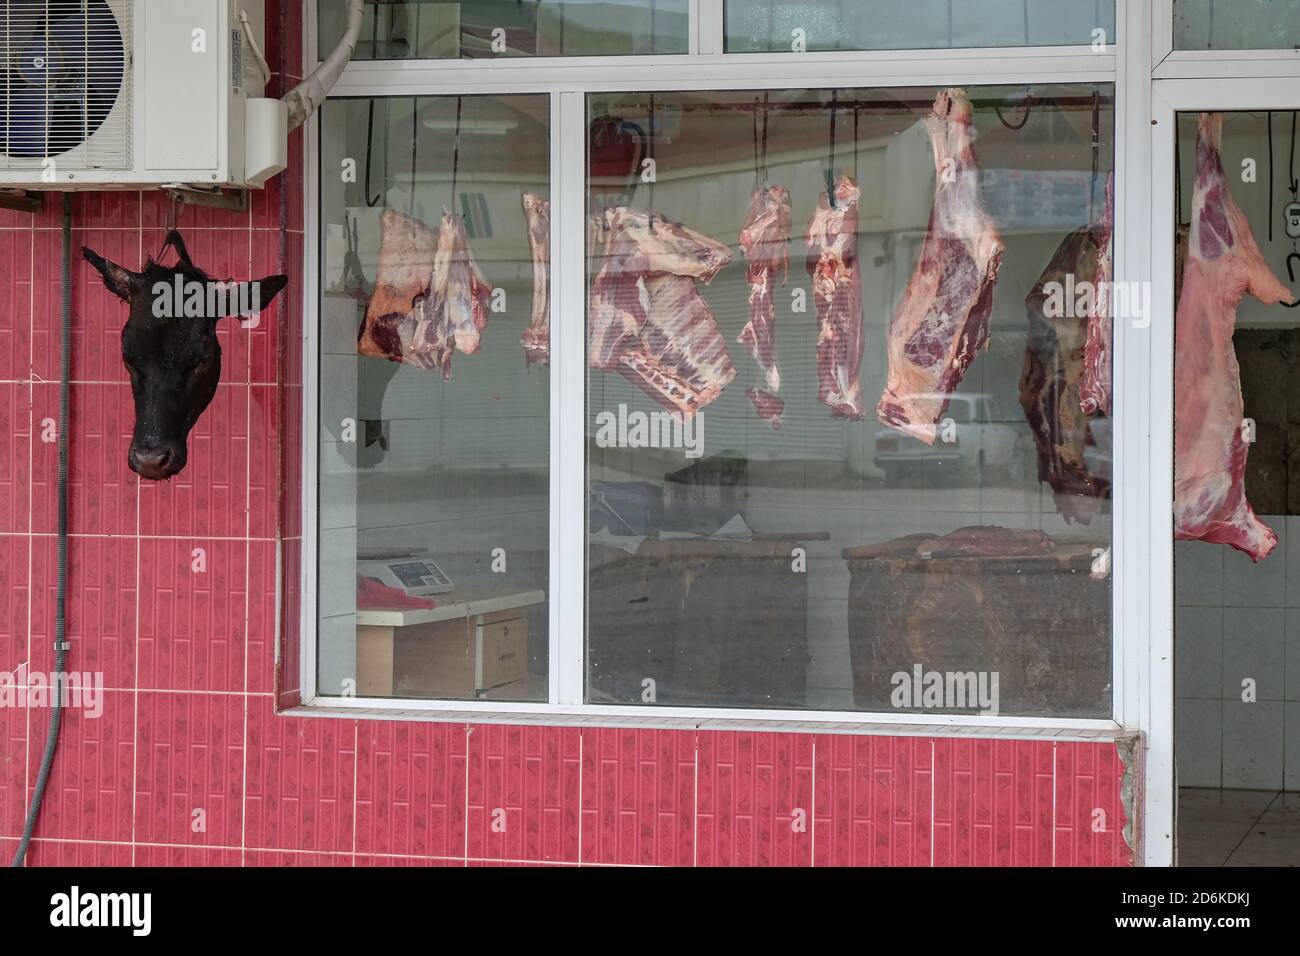 View through dirty blurred window glass to fresh meat carcasses hanging and severed head on hook in street butchers shop in caucasus village market. Stock Photo